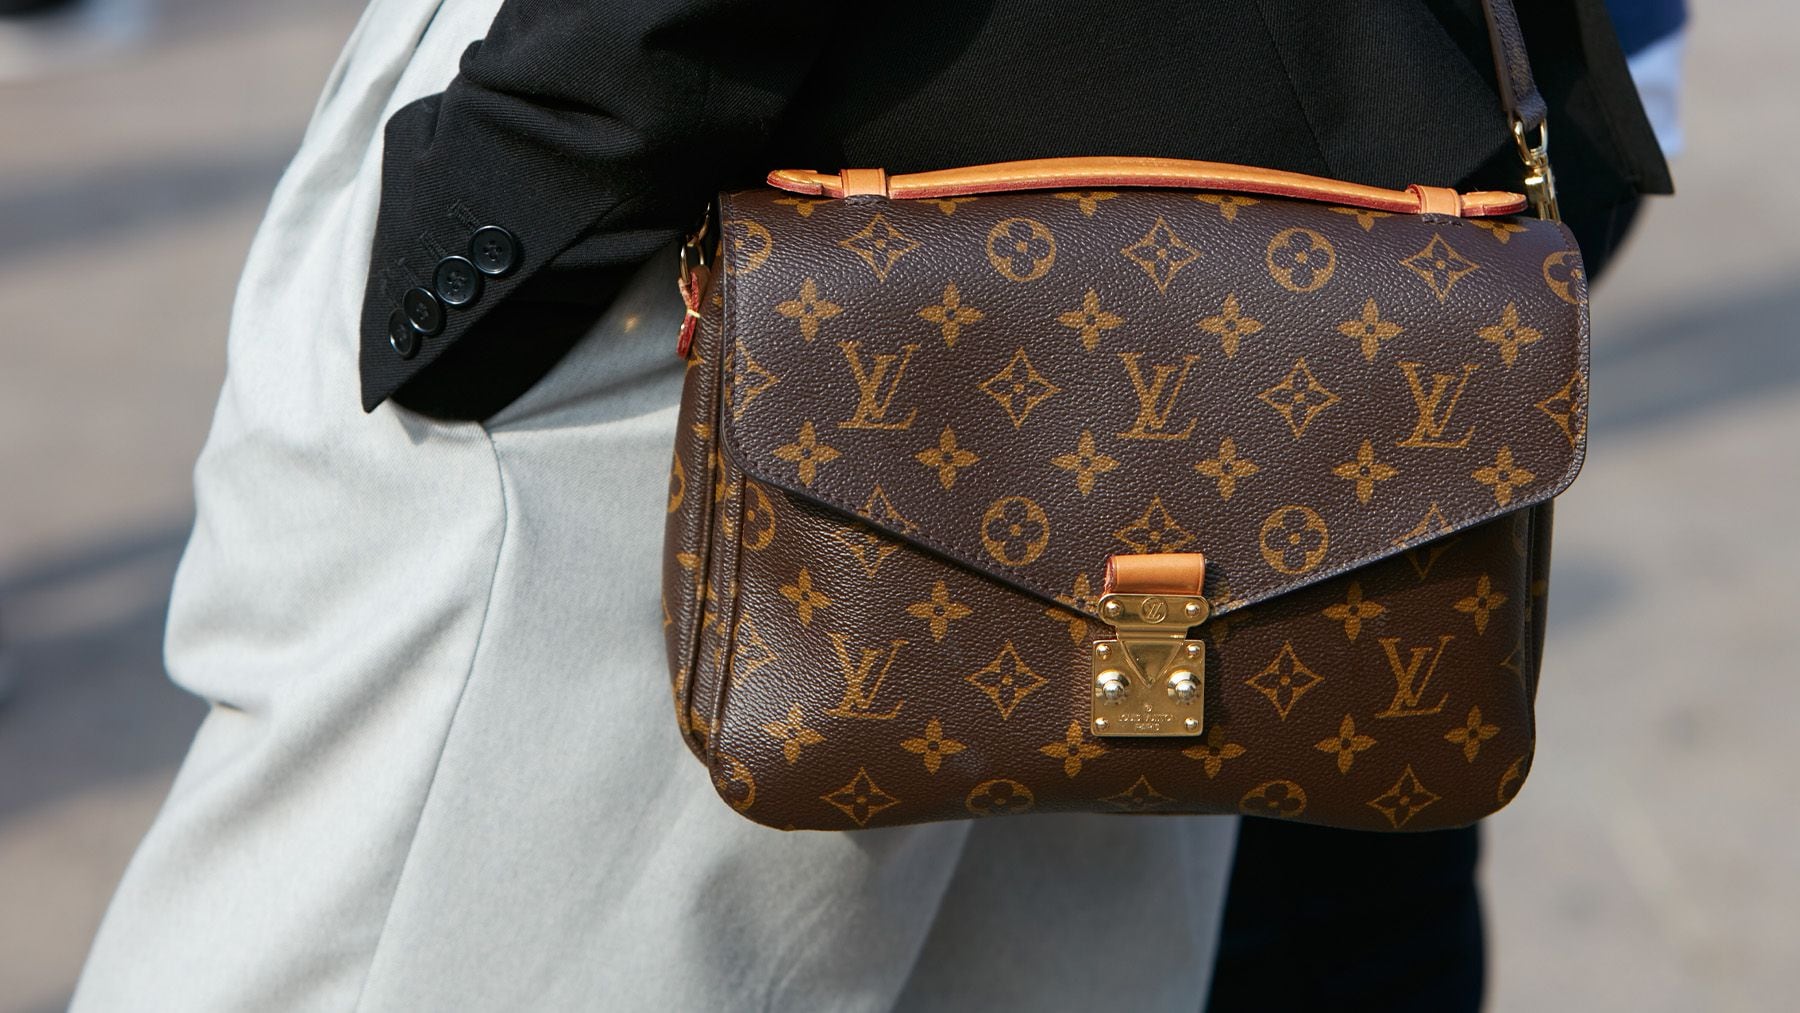 After Rare Walkout, Louis Vuitton and Workers in France Agree to Extend  Talks - The New York Times